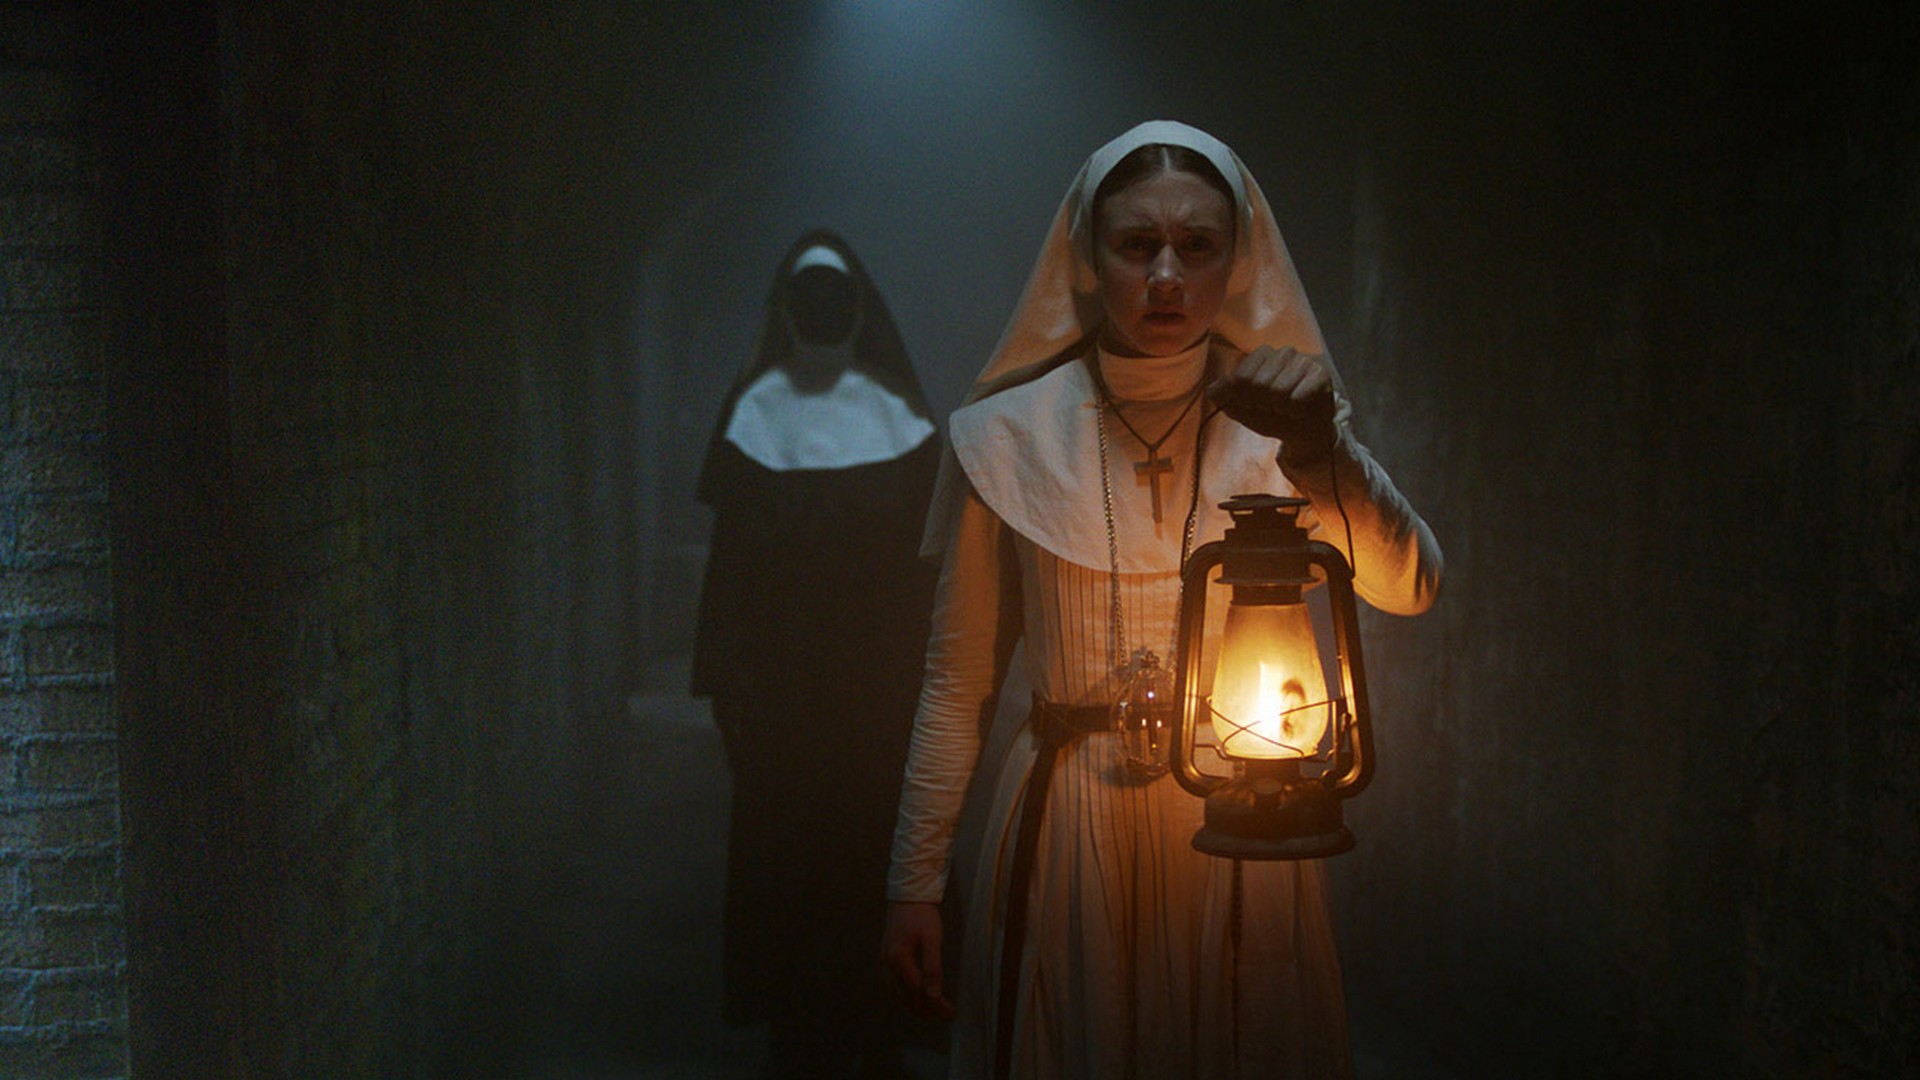 The Nun Poster Wallpaper with resolution 1920X1080 pixel. You can use this wallpaper as background for your desktop Computer Screensavers, Android or iPhone smartphones